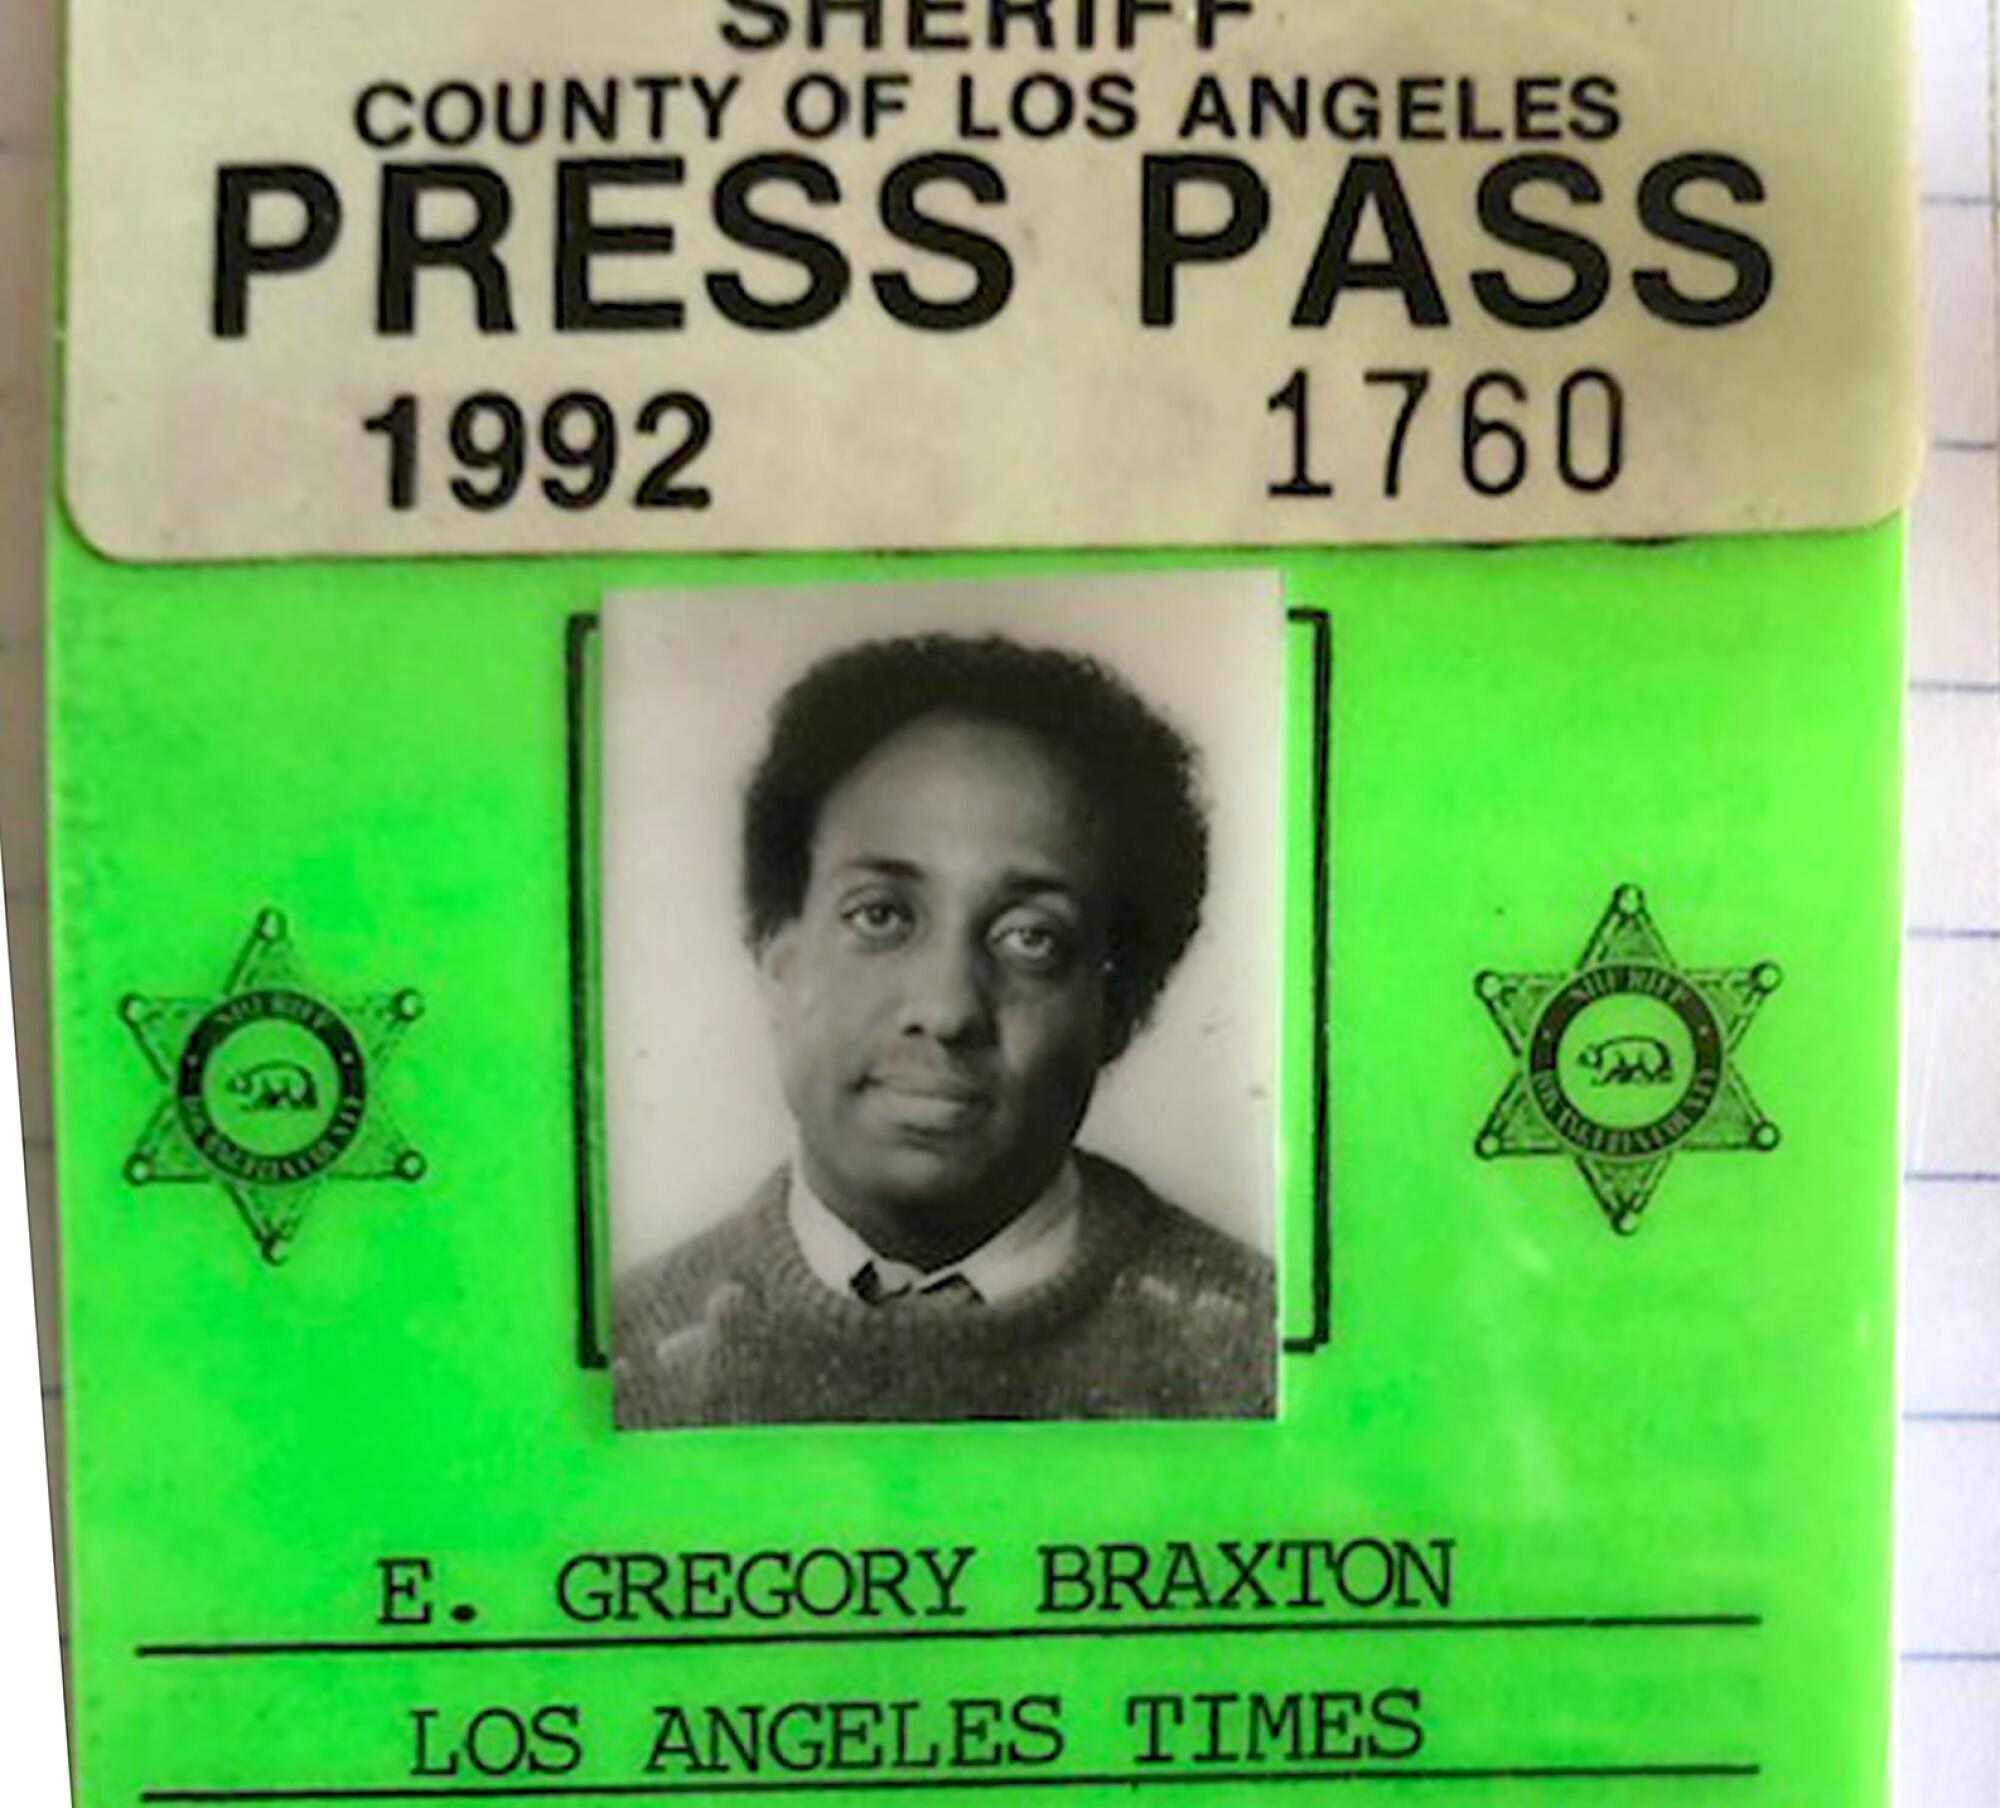 A bright green L.A. County press pass reads E. Gregory Braxton, Los Angeles Times